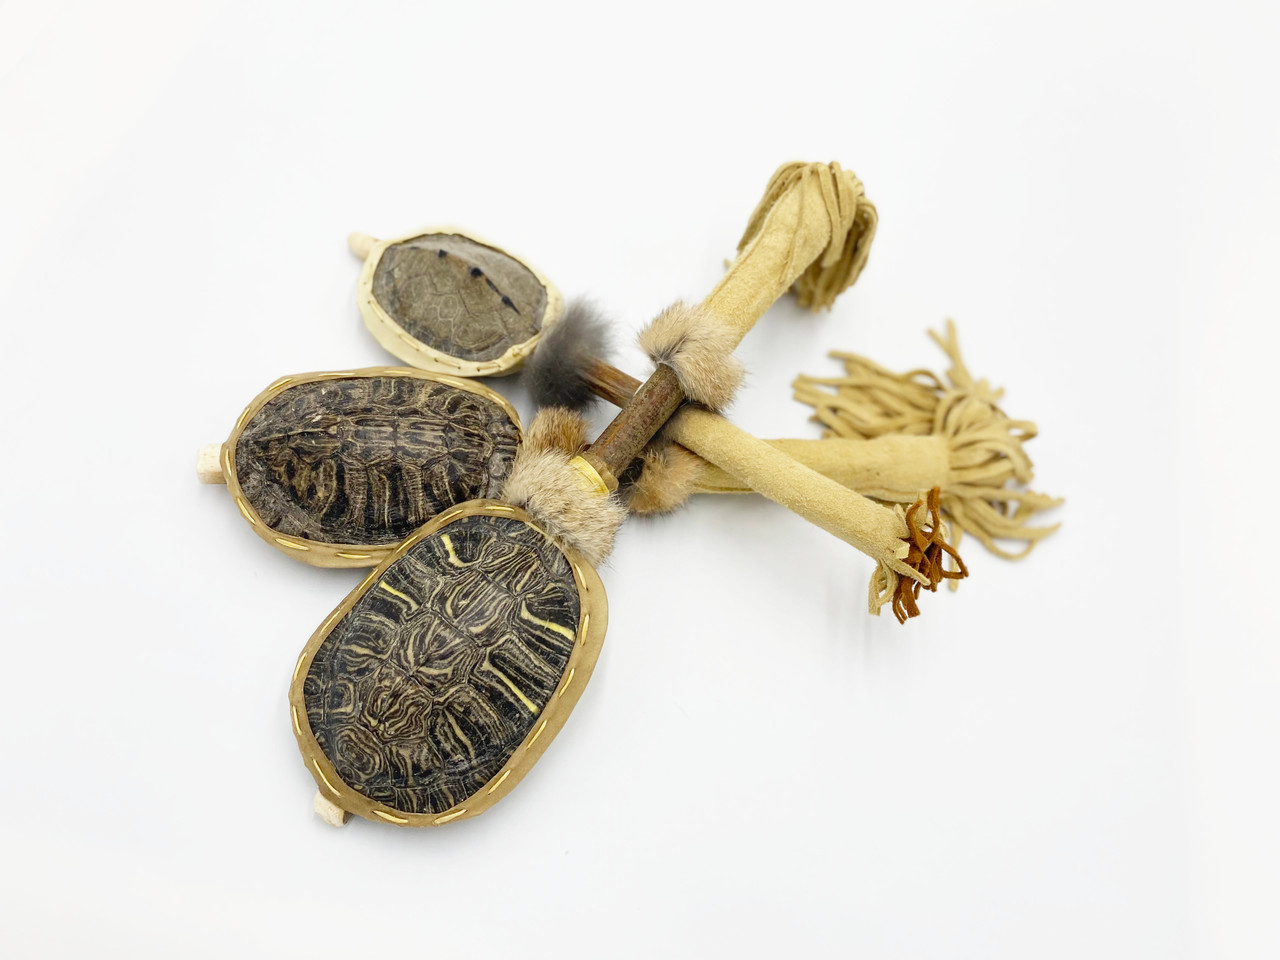 Turtle Shell Rattle - Sunreed Instruments